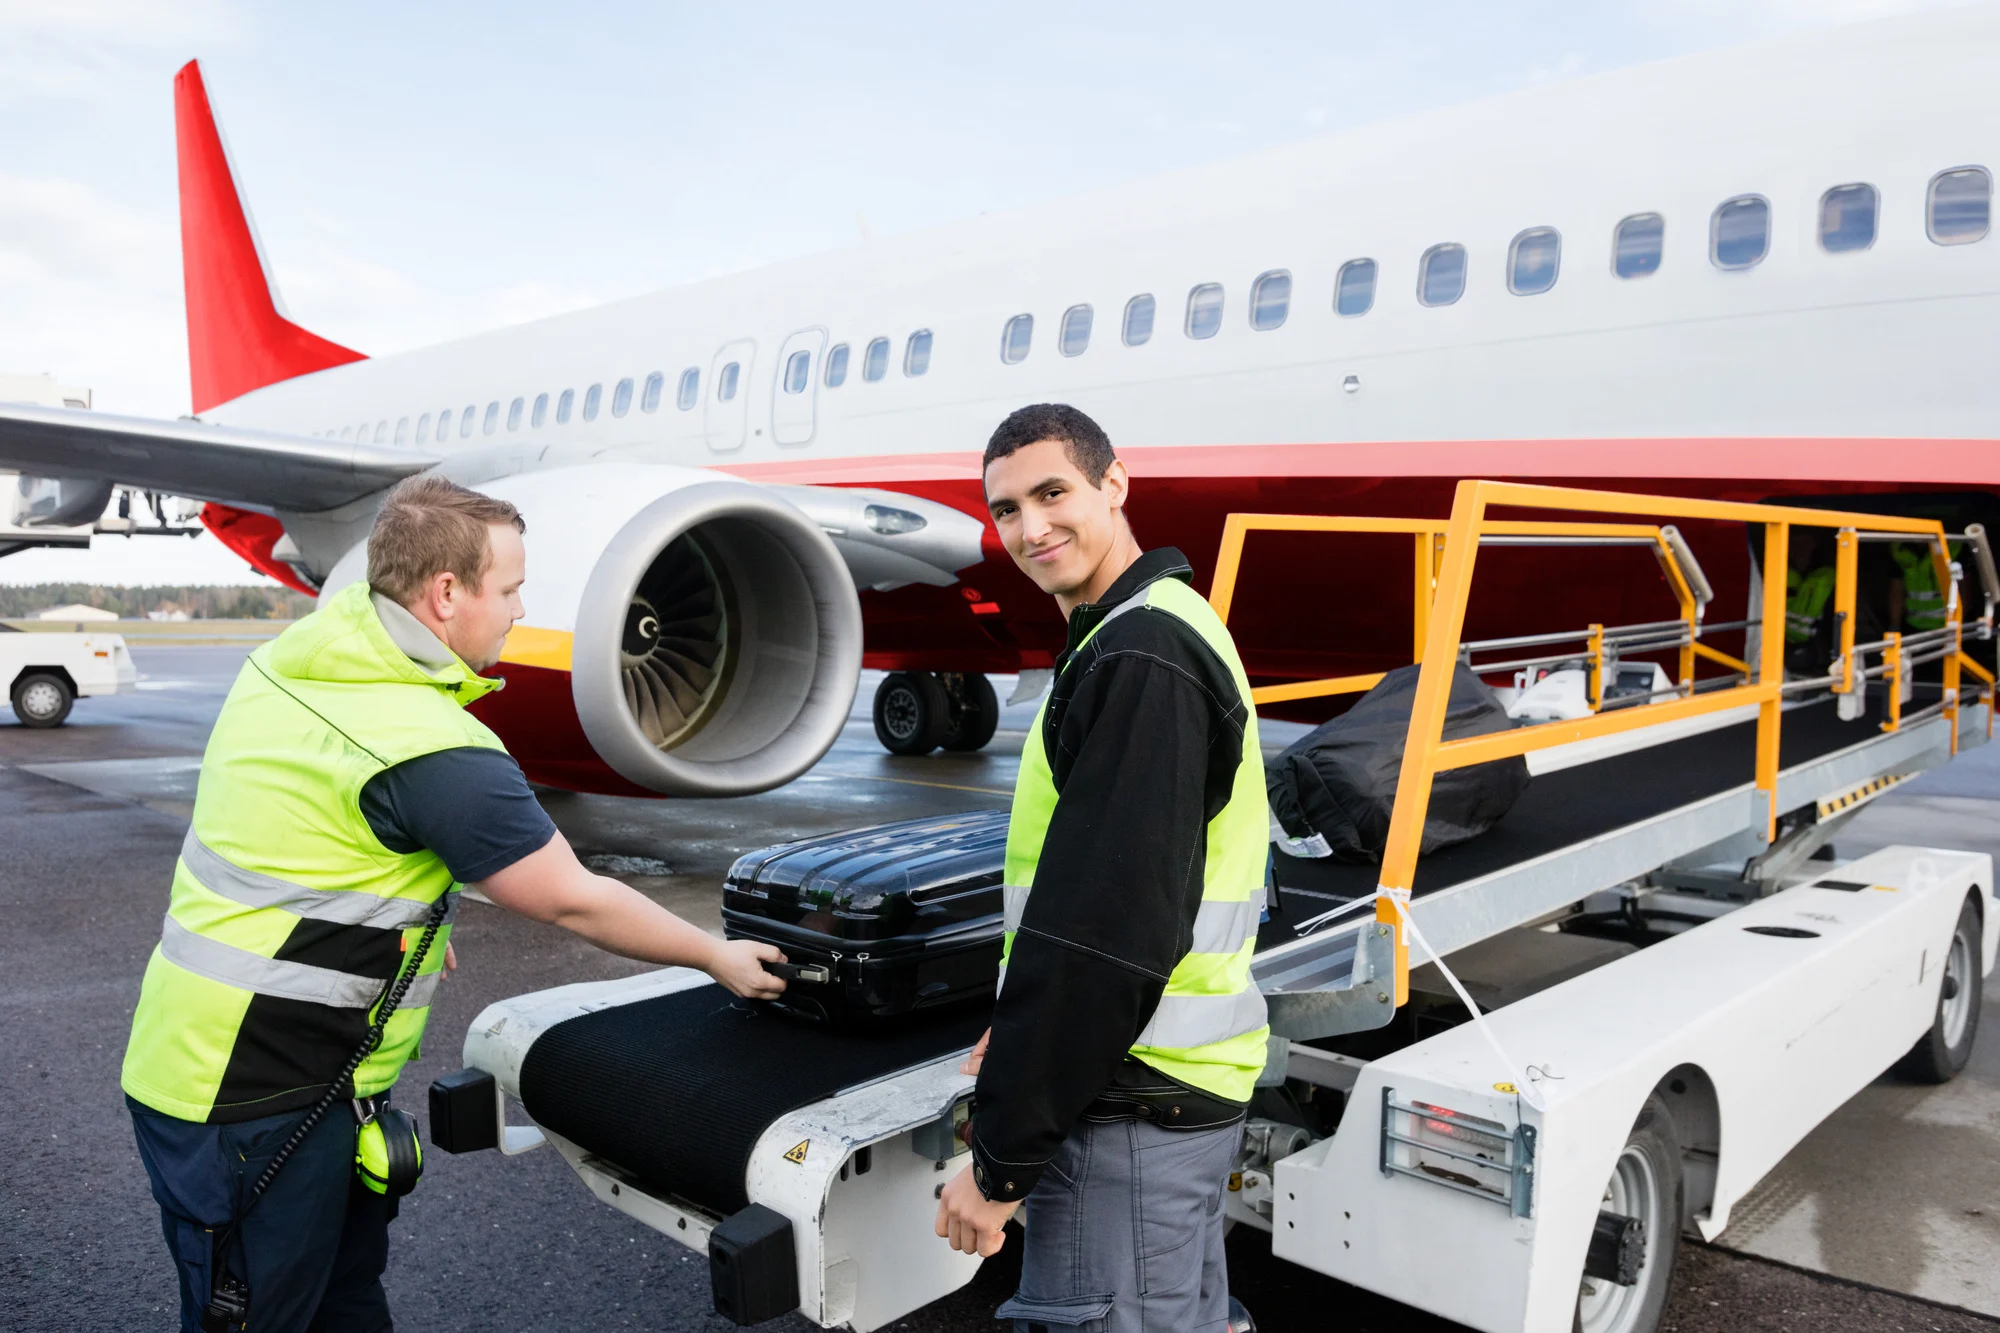 Portrait of confident worker smiling while colleague unloading luggage on runway